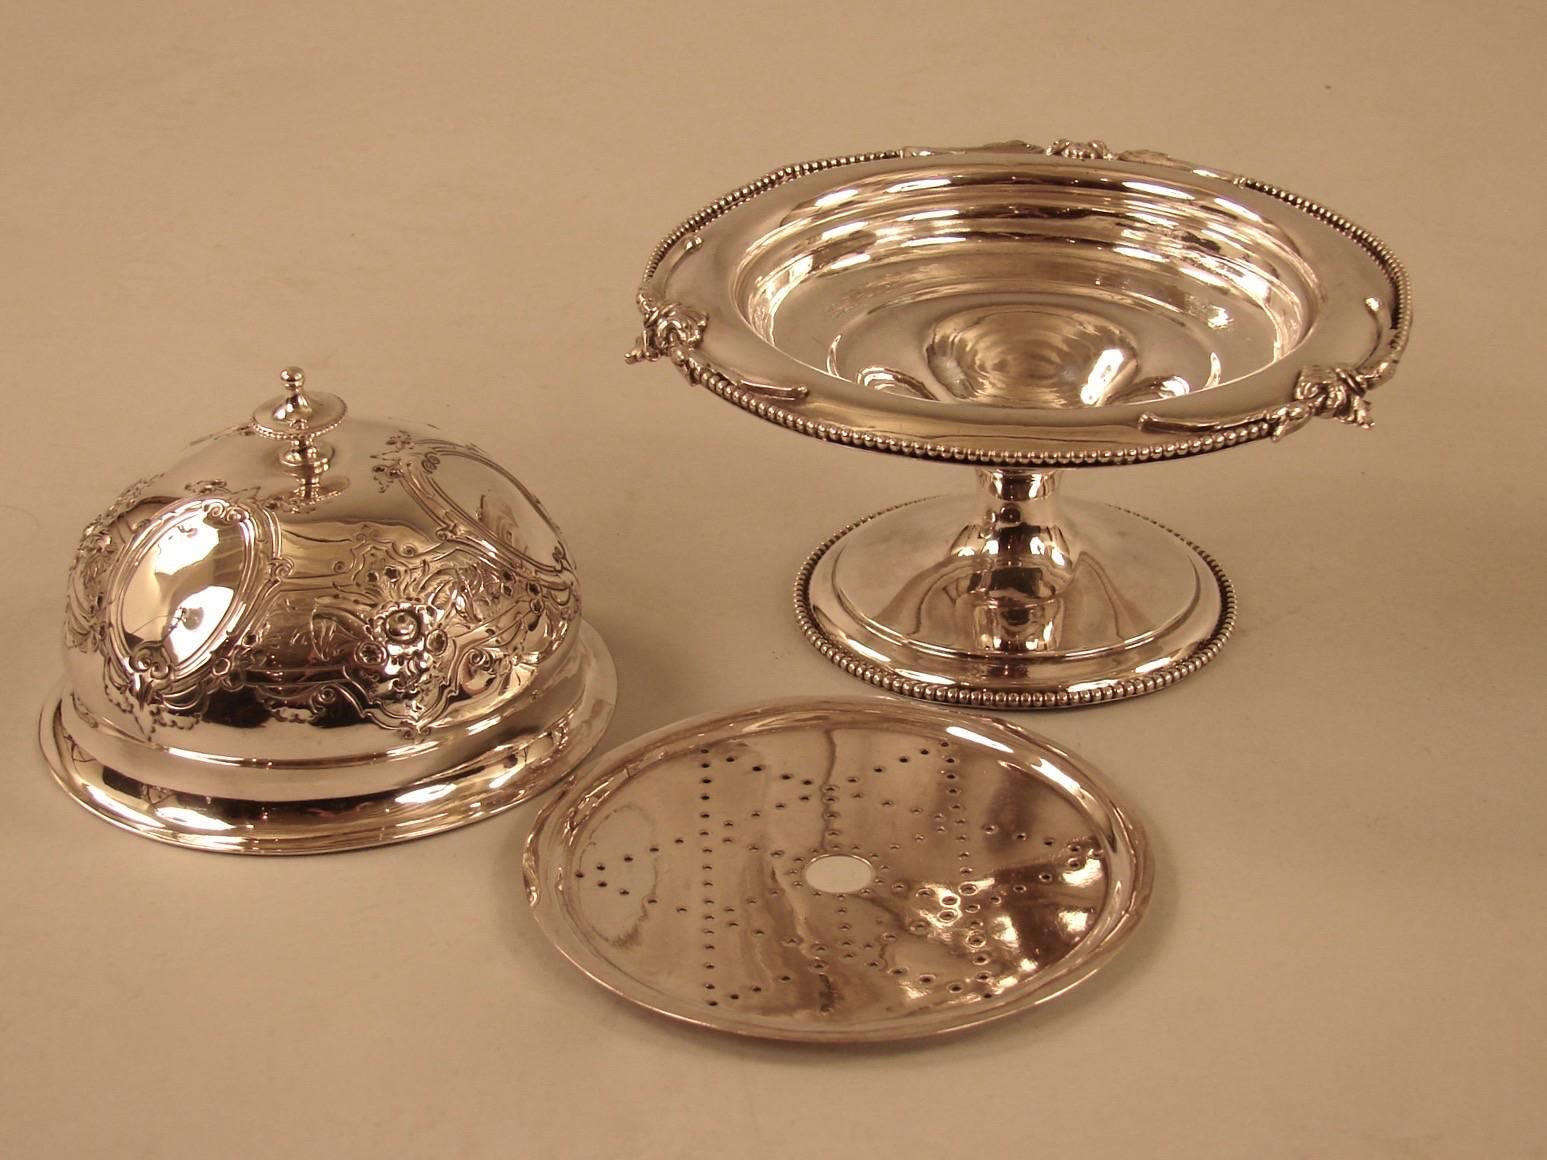 An American sterling silver covered butter dish made by W.K. Vanderslice & Co. of San Francisco, the interior with a pierced liner, circa 1880.